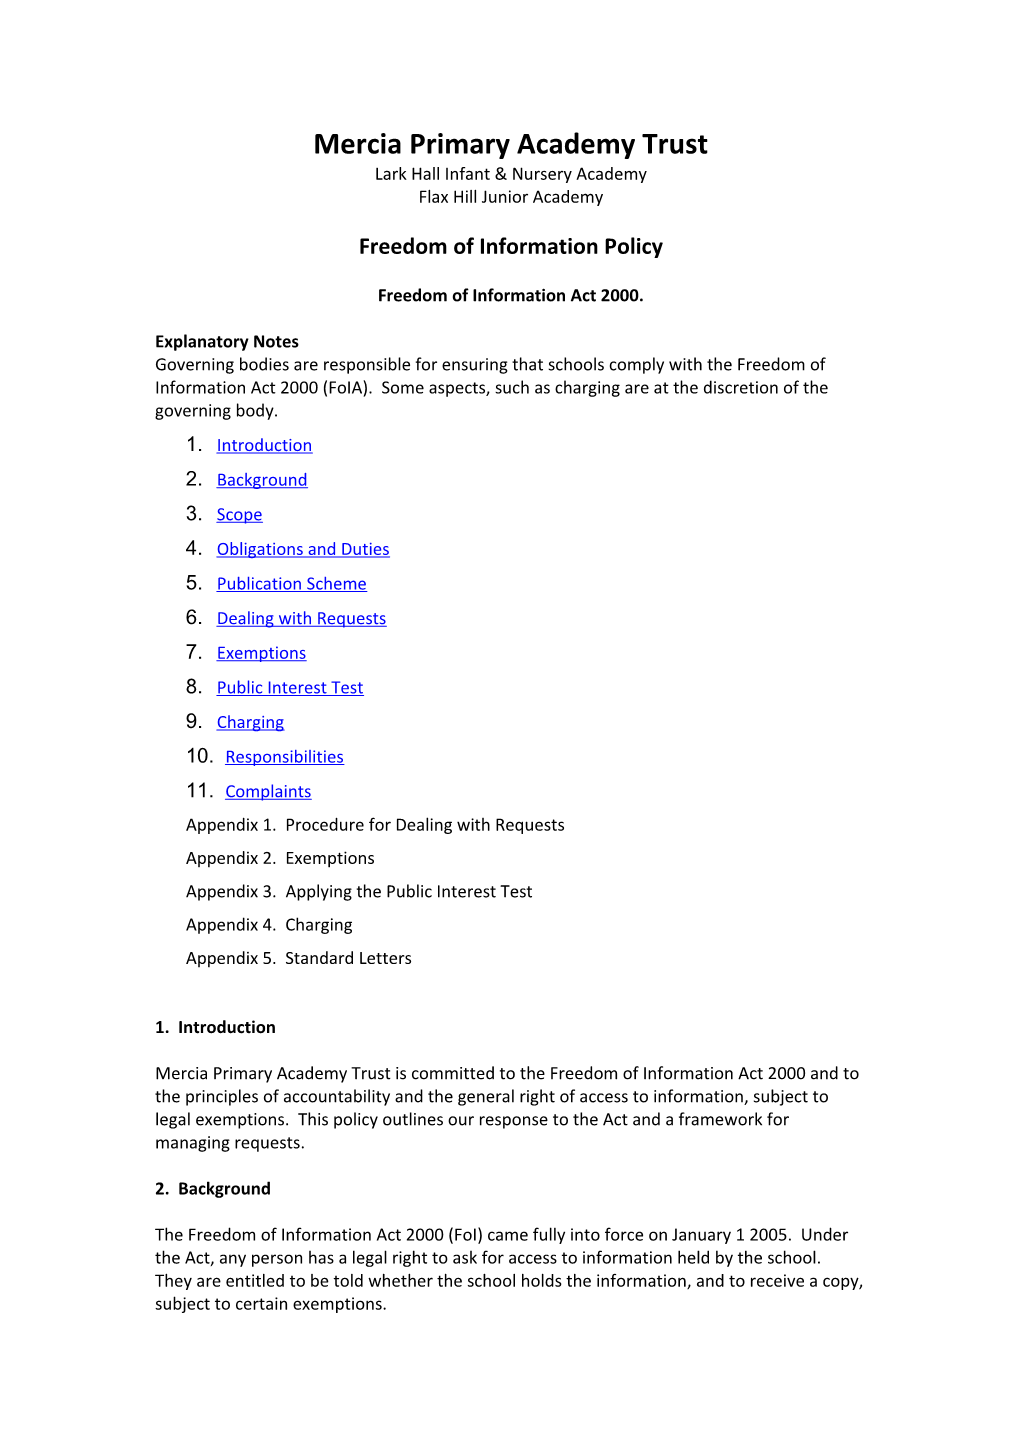 Freedom of Information Model School Policy